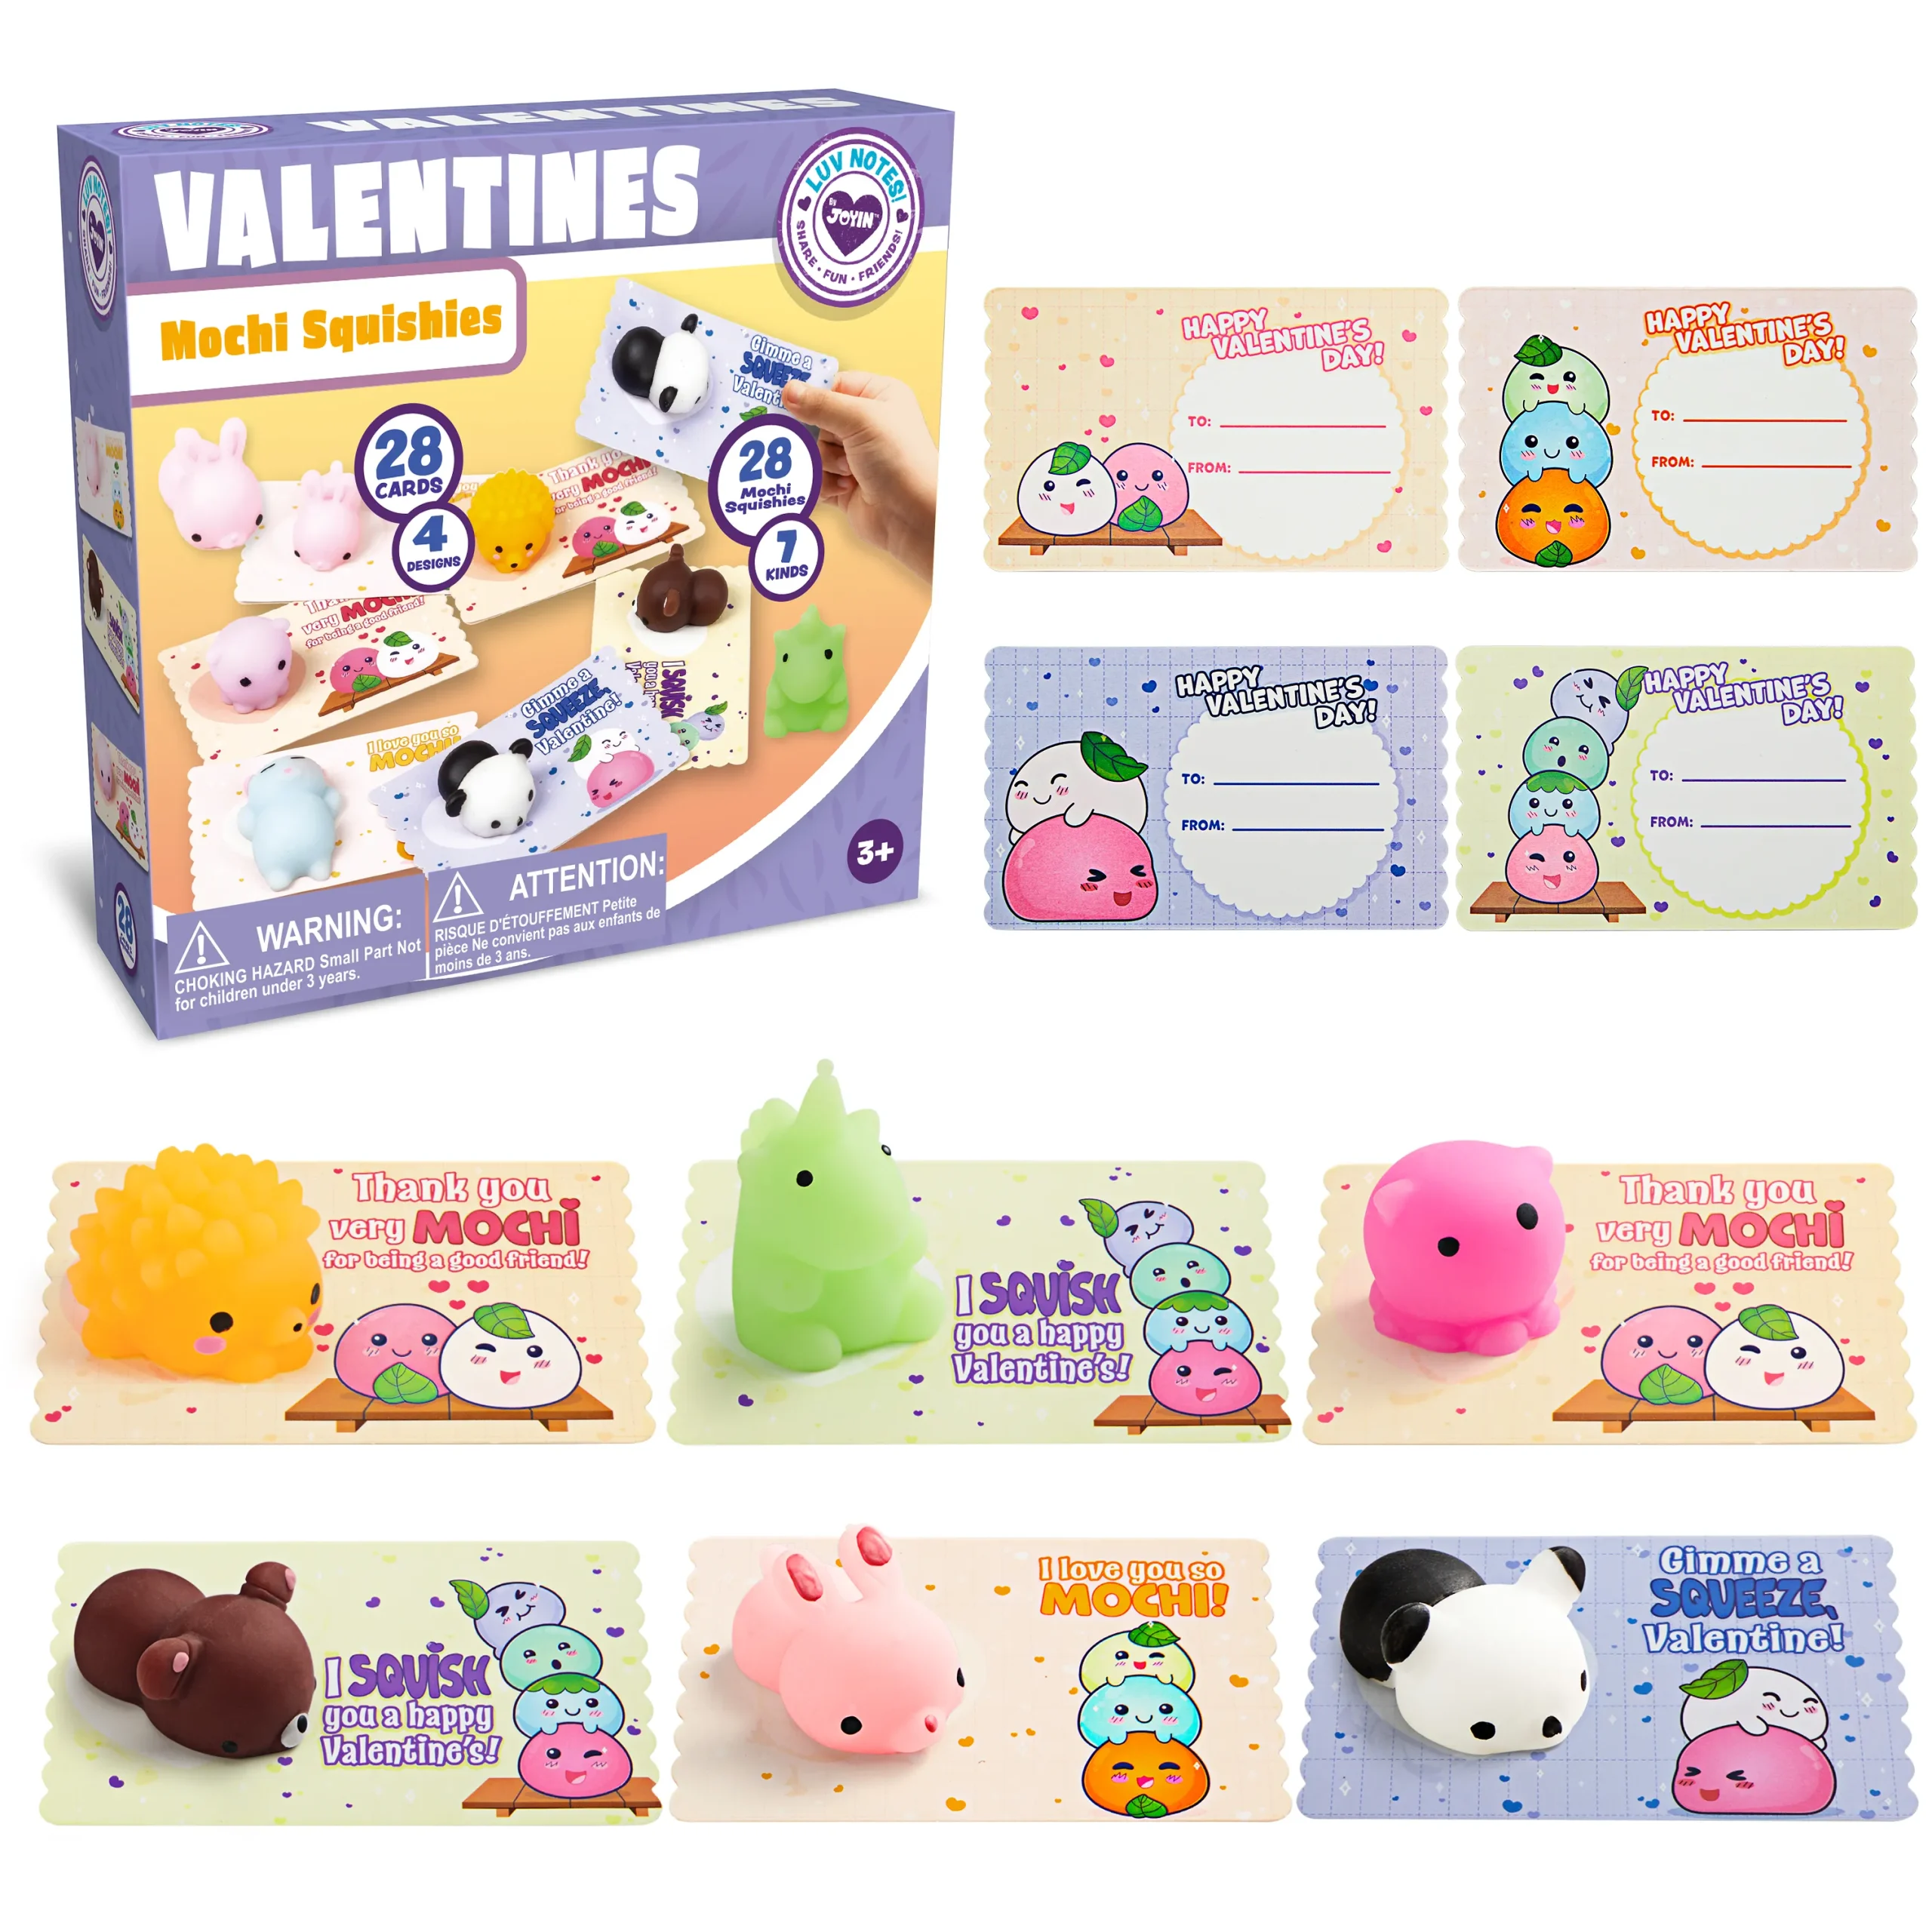  36 Pack Valentines Day Gifts for Kids, Valentines Greeting  Cards with 12 Kinds Mochi Squishy Toys